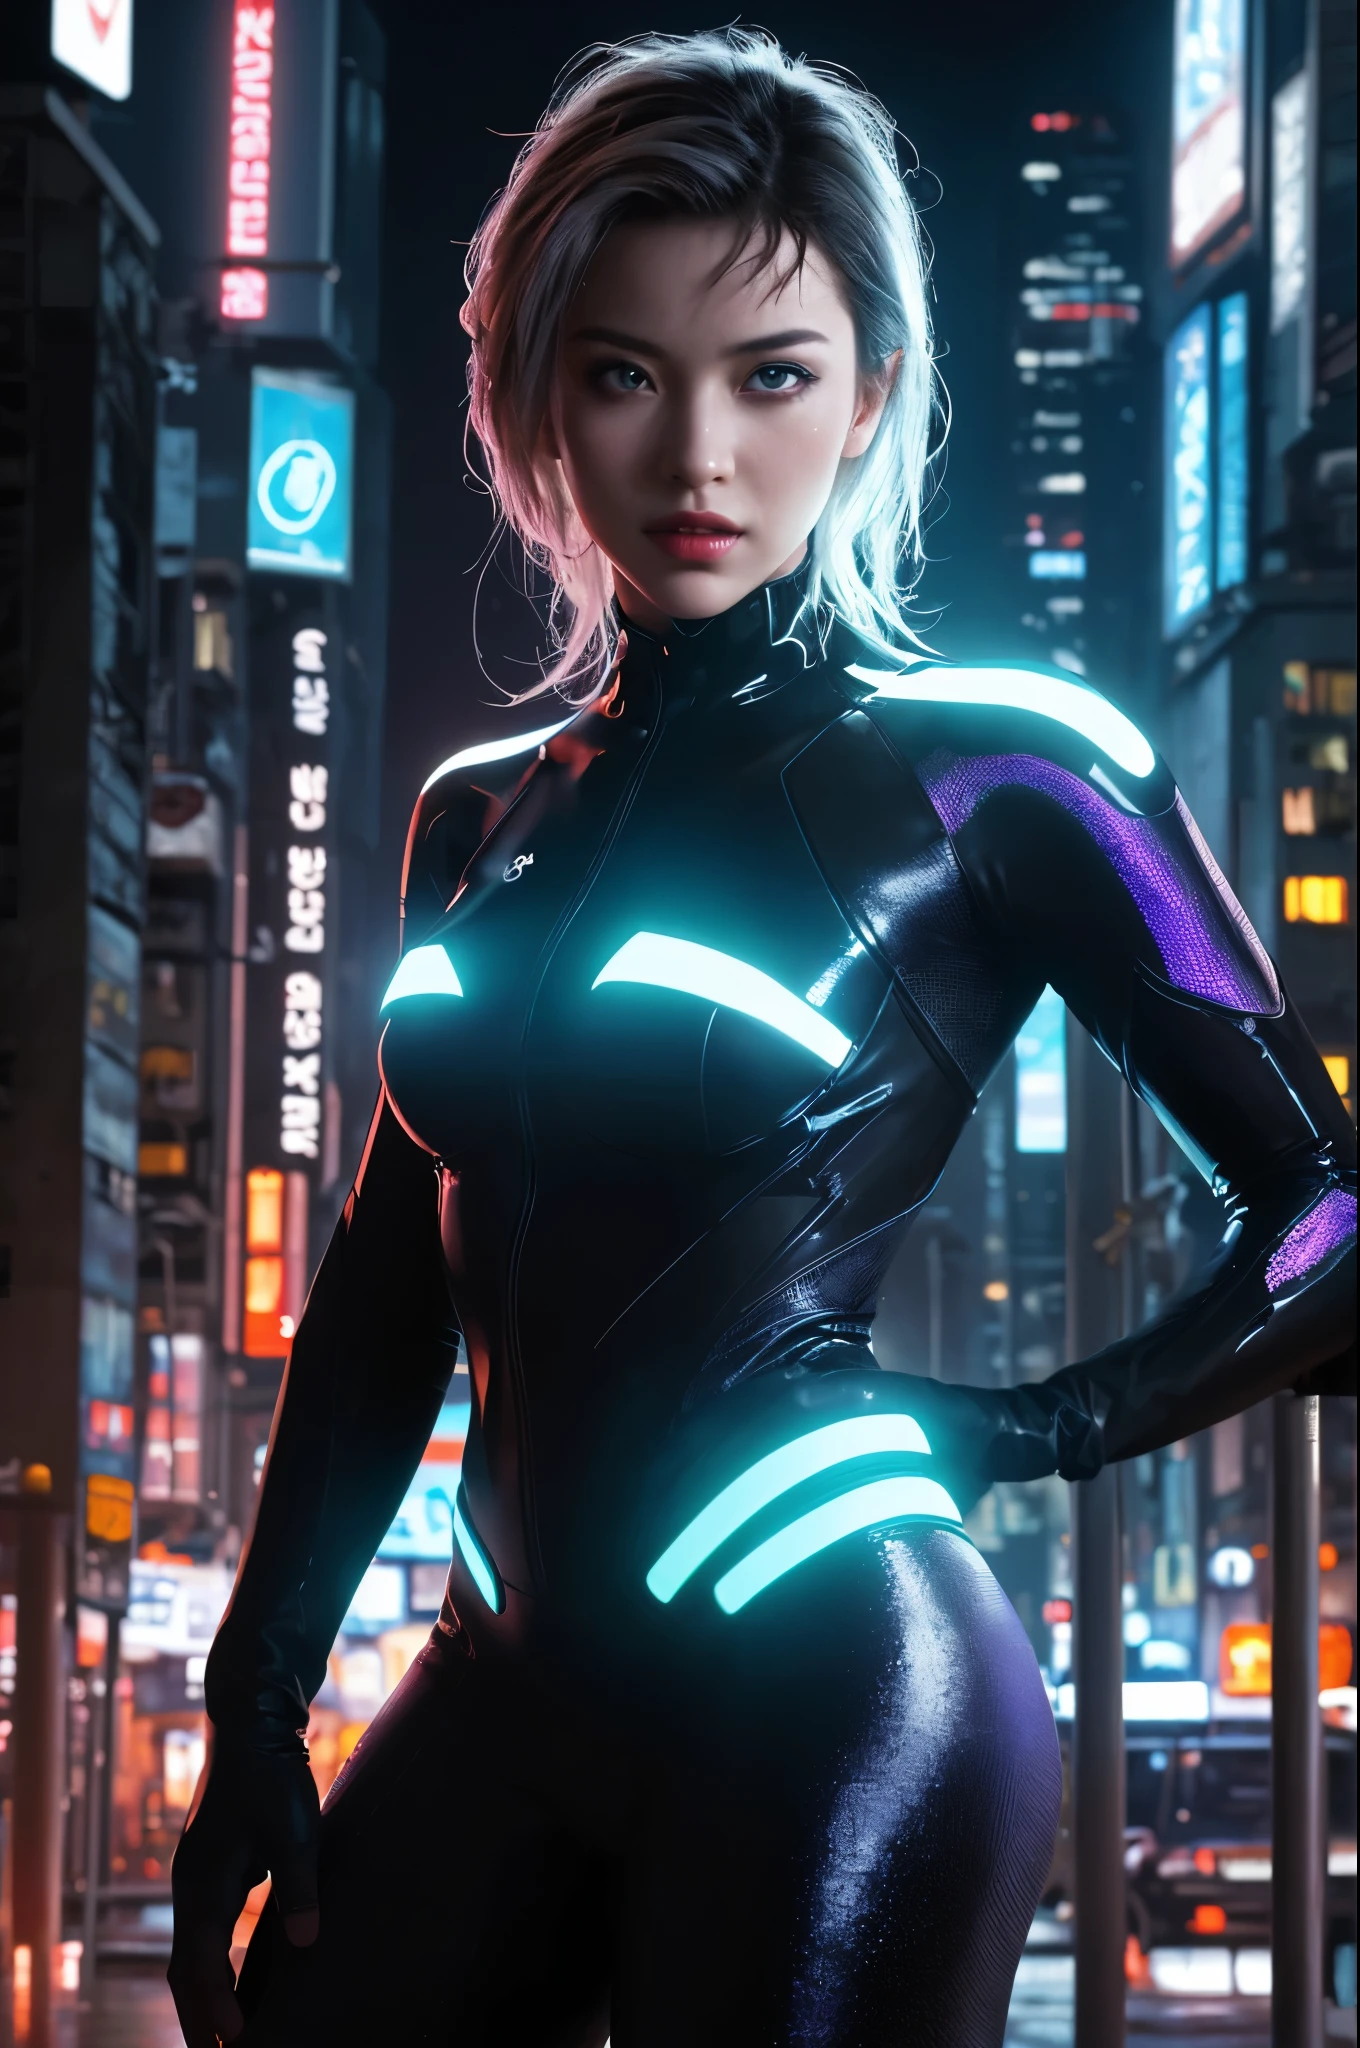 
(best quality, highres:1.2), ultra-detailed, (realistic:1.37) A sexy tron girl, vibrant holographic colors, with glowing lines tracing her curves. (futuristic, cyberpunk) vibe, light projections highlighting her sleek metallic suit, (electric blue) and (neon purple) illuminating her luminous figure. She confidently strikes (strong, fierce, powerful) fighting poses, showcasing her agility and strength. (bright, sharp) eyes pierce through the darkness, (sparkling, mesmerizing) with intensity and determination. Her (luscious, glossy) lips, radiating a (subtle, seductive) smile, hint at her playful yet fierce nature. The background is a (dystopian, futuristic) cityscape filled with towering skyscrapers, (reflecting off the wet streets, adorned with holographic billboards) casting an (eerie, vibrant) glow. Strategically positioned (light beams, spotlights), (accentuating, illuminating) her silhouette, draw attention to her captivating presence. The painting style is a mix of (digital illustration, digital painting), combining (photo-realistic) details with (stylized, sleek) elements. The entire scene bathes in a (cool, neon) color palette, with (bright, contrasting) hues adding depth and interest. The lighting is (dynamic, dramatic), casting (shadows, highlights) that bring depth and dimension to the tron girl and the surroundings.